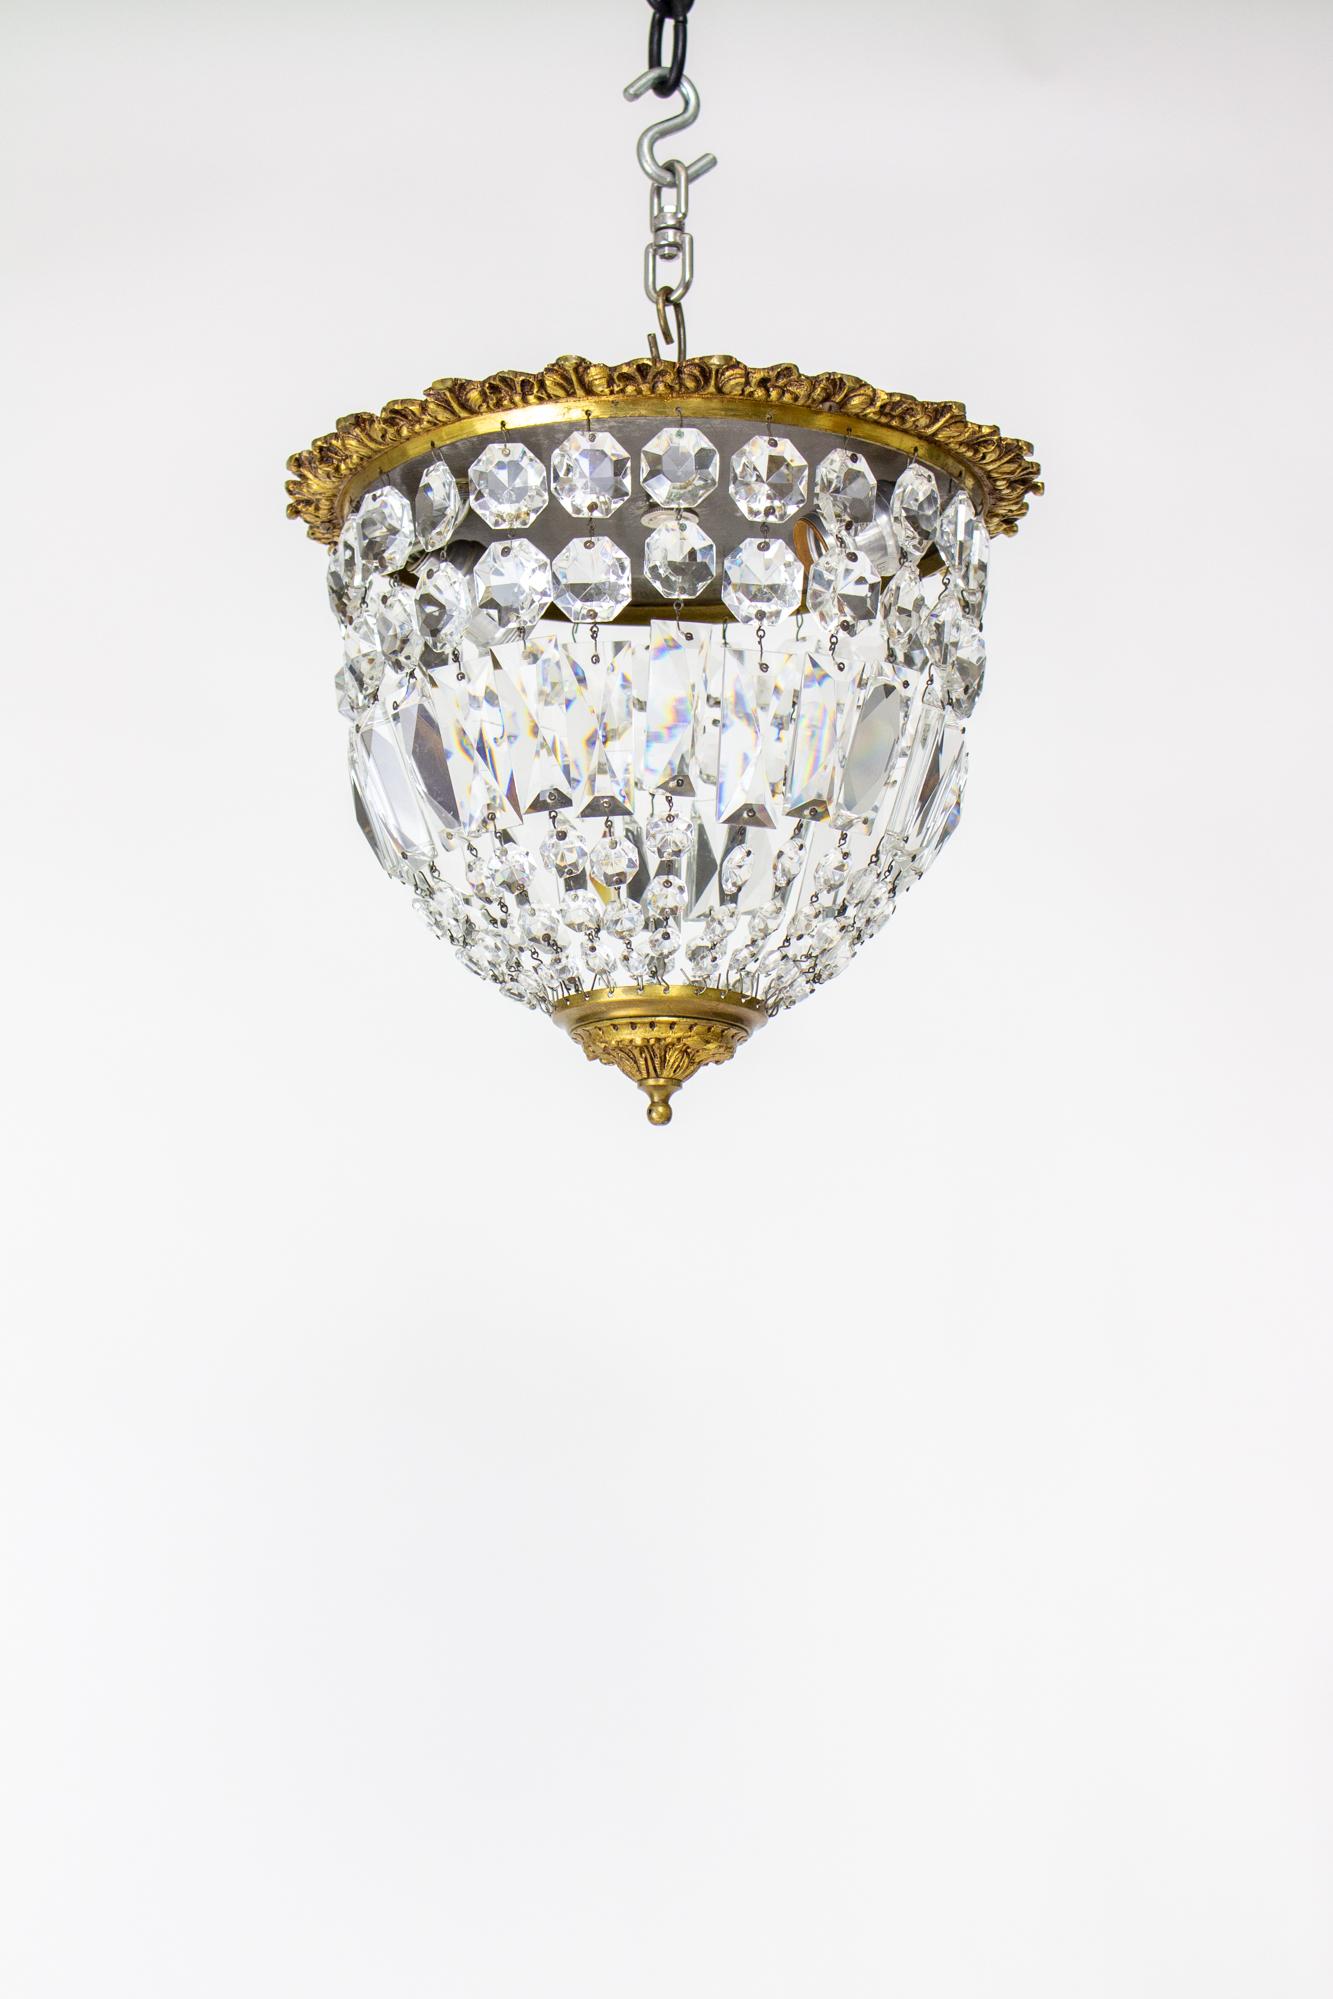 Mid 20th Century Brass and Crystal Basket Flush Mount Fixture For Sale 3